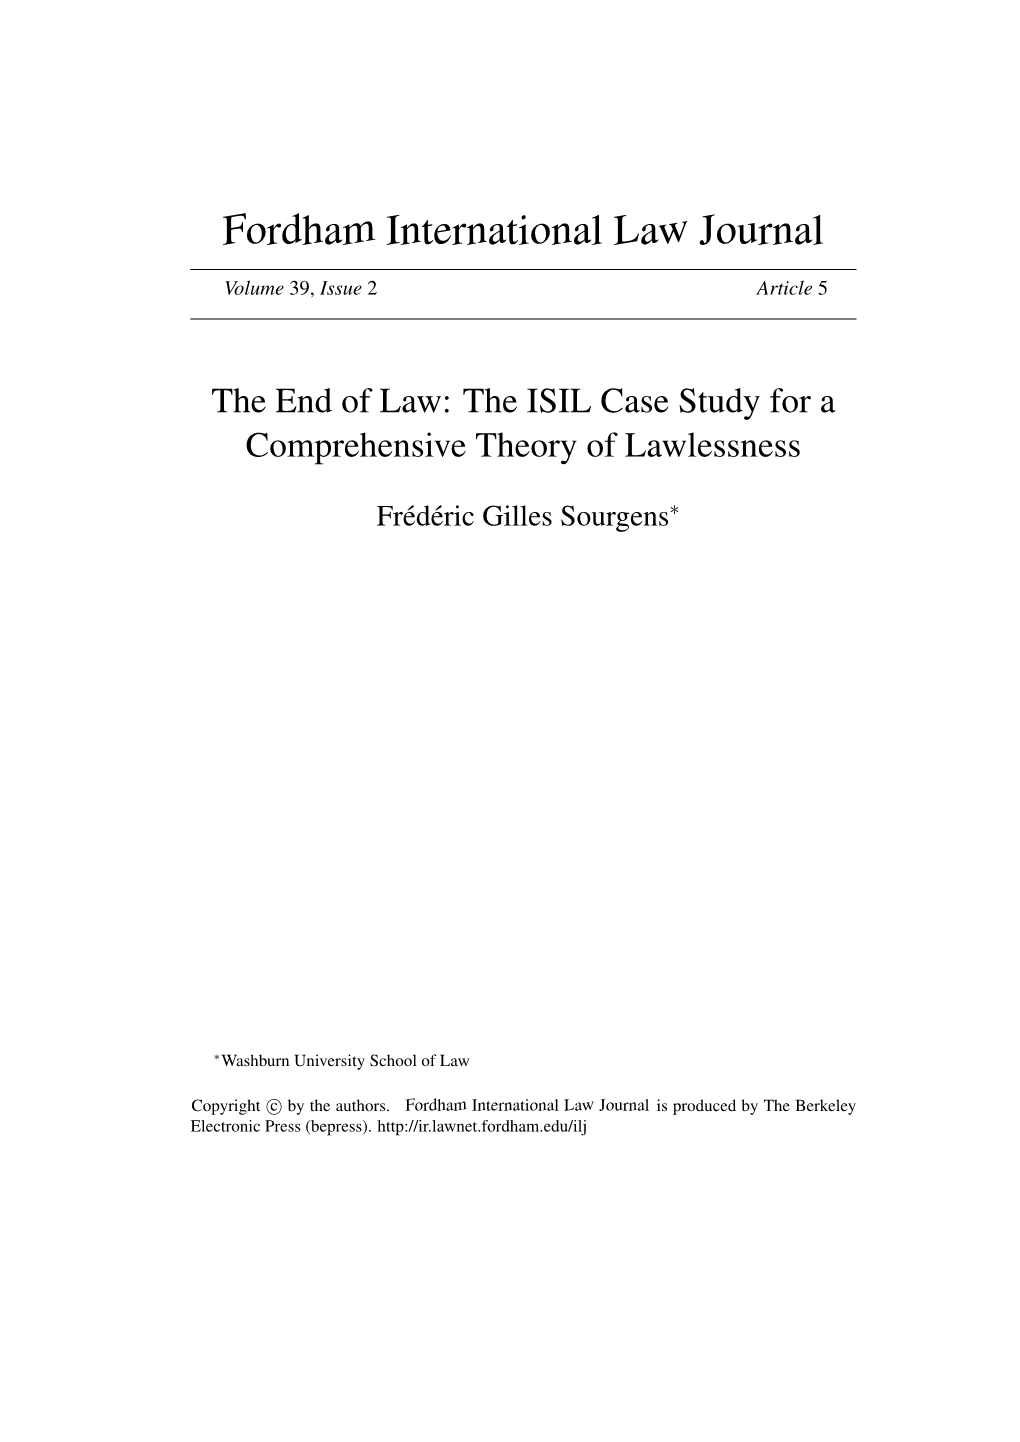 The End of Law: the ISIL Case Study for a Comprehensive Theory of Lawlessness